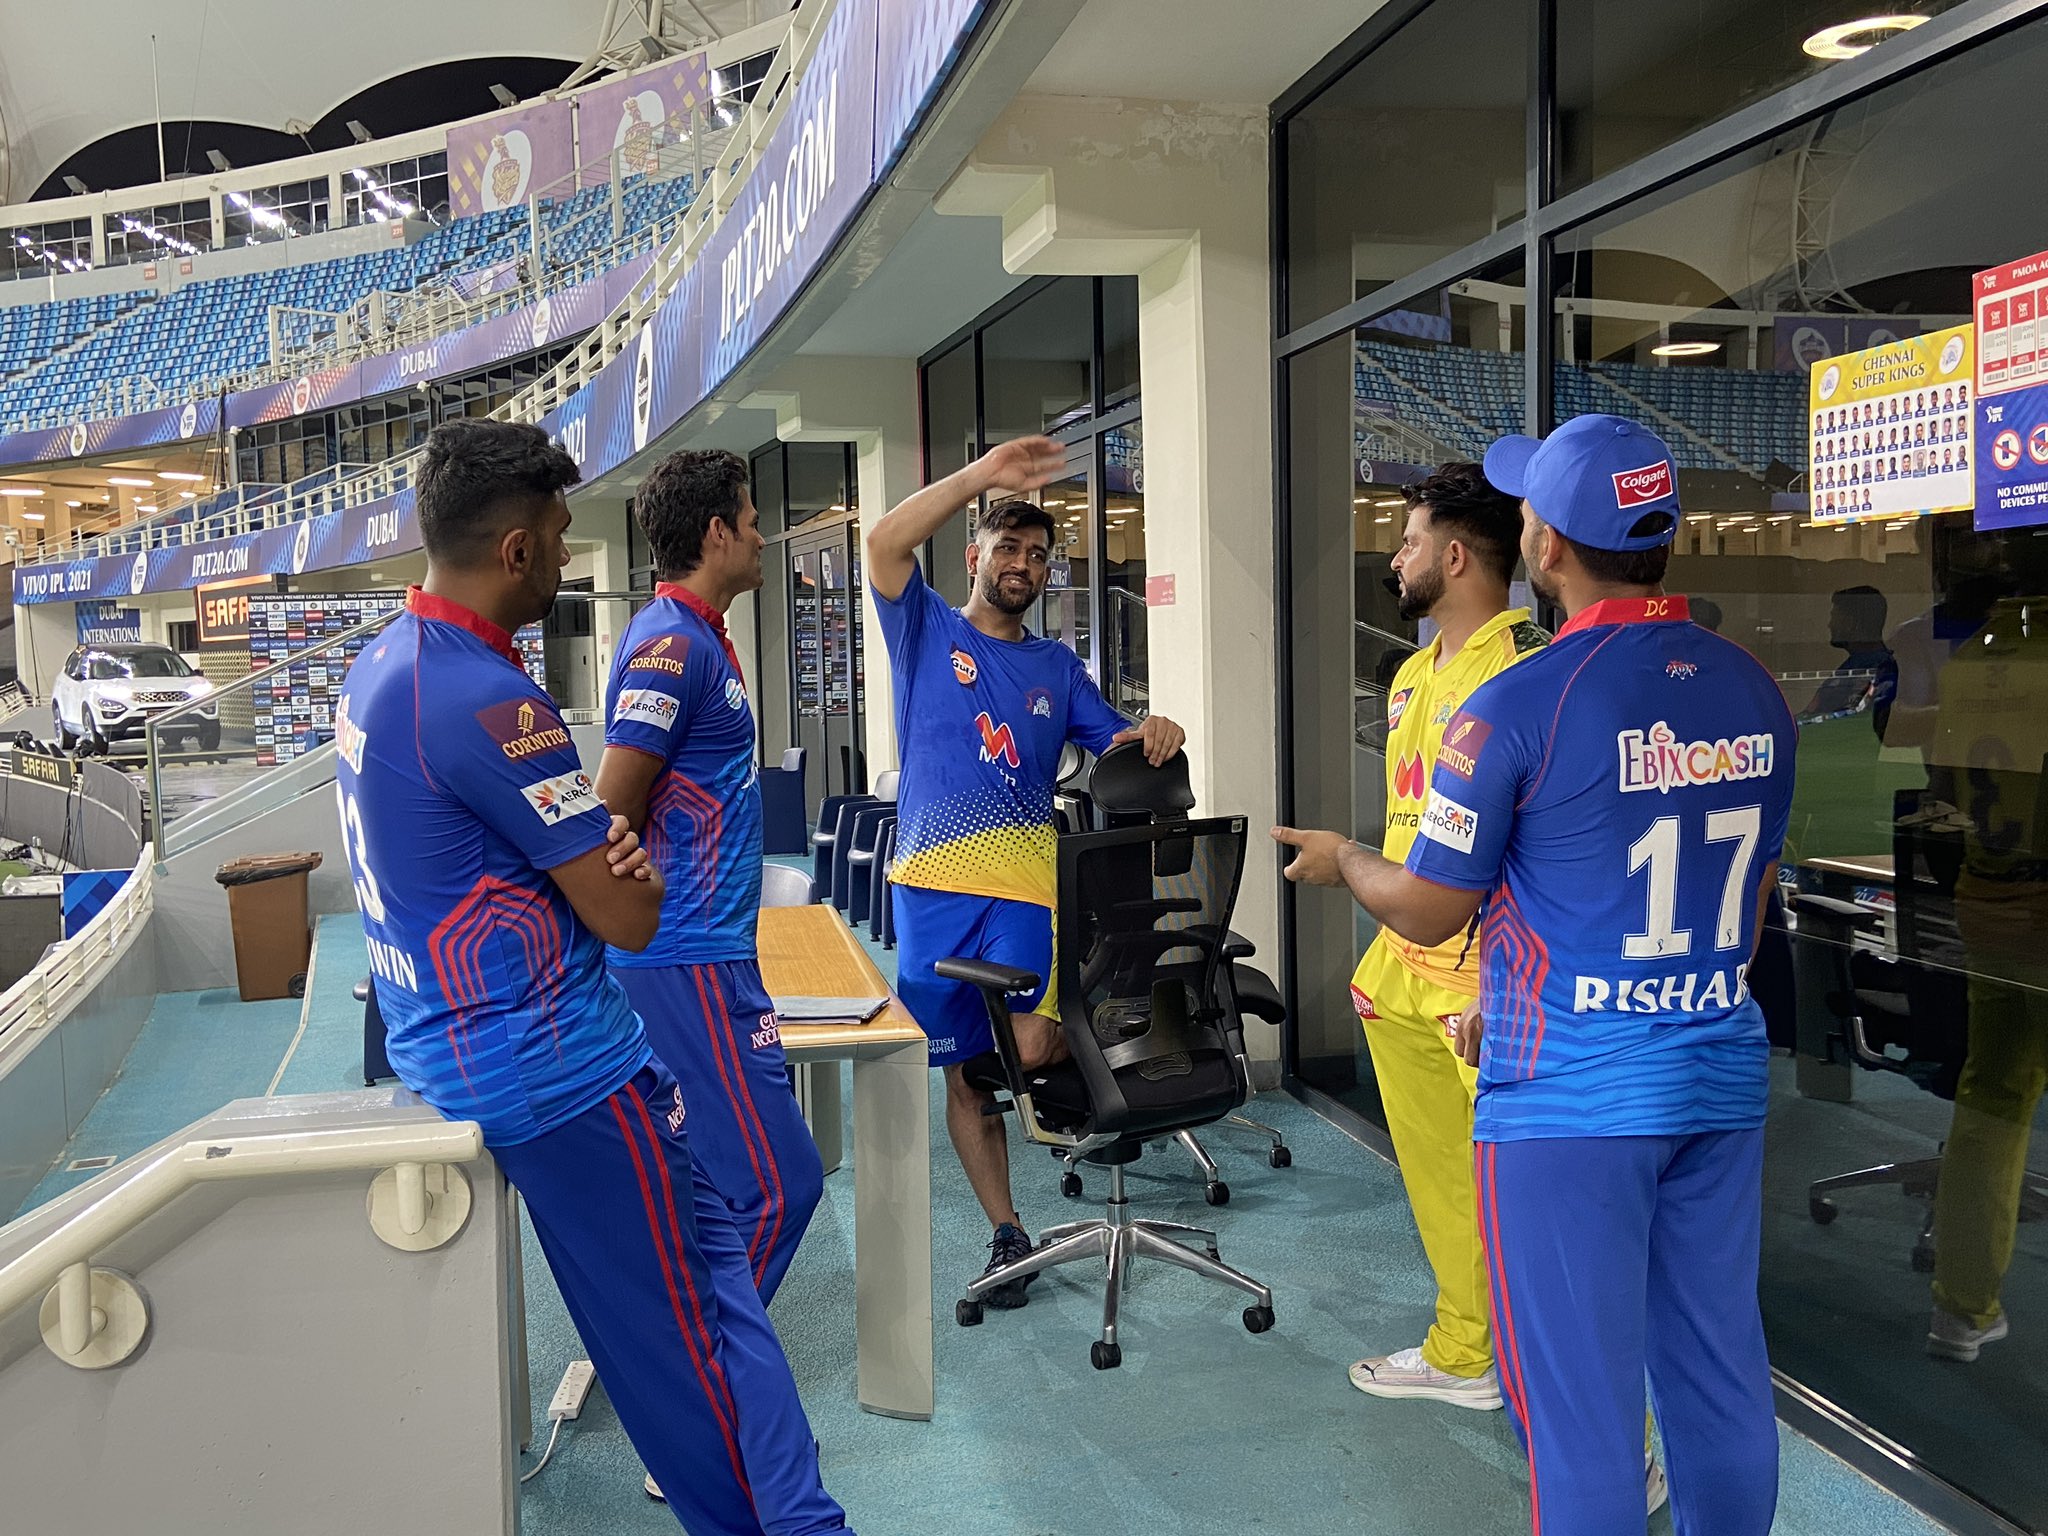 IPL 2021 Playoffs | Three bets which can fetch you big bucks from Chennai Super Kings (CSK) vs Delhi Capitals (DC) fixture